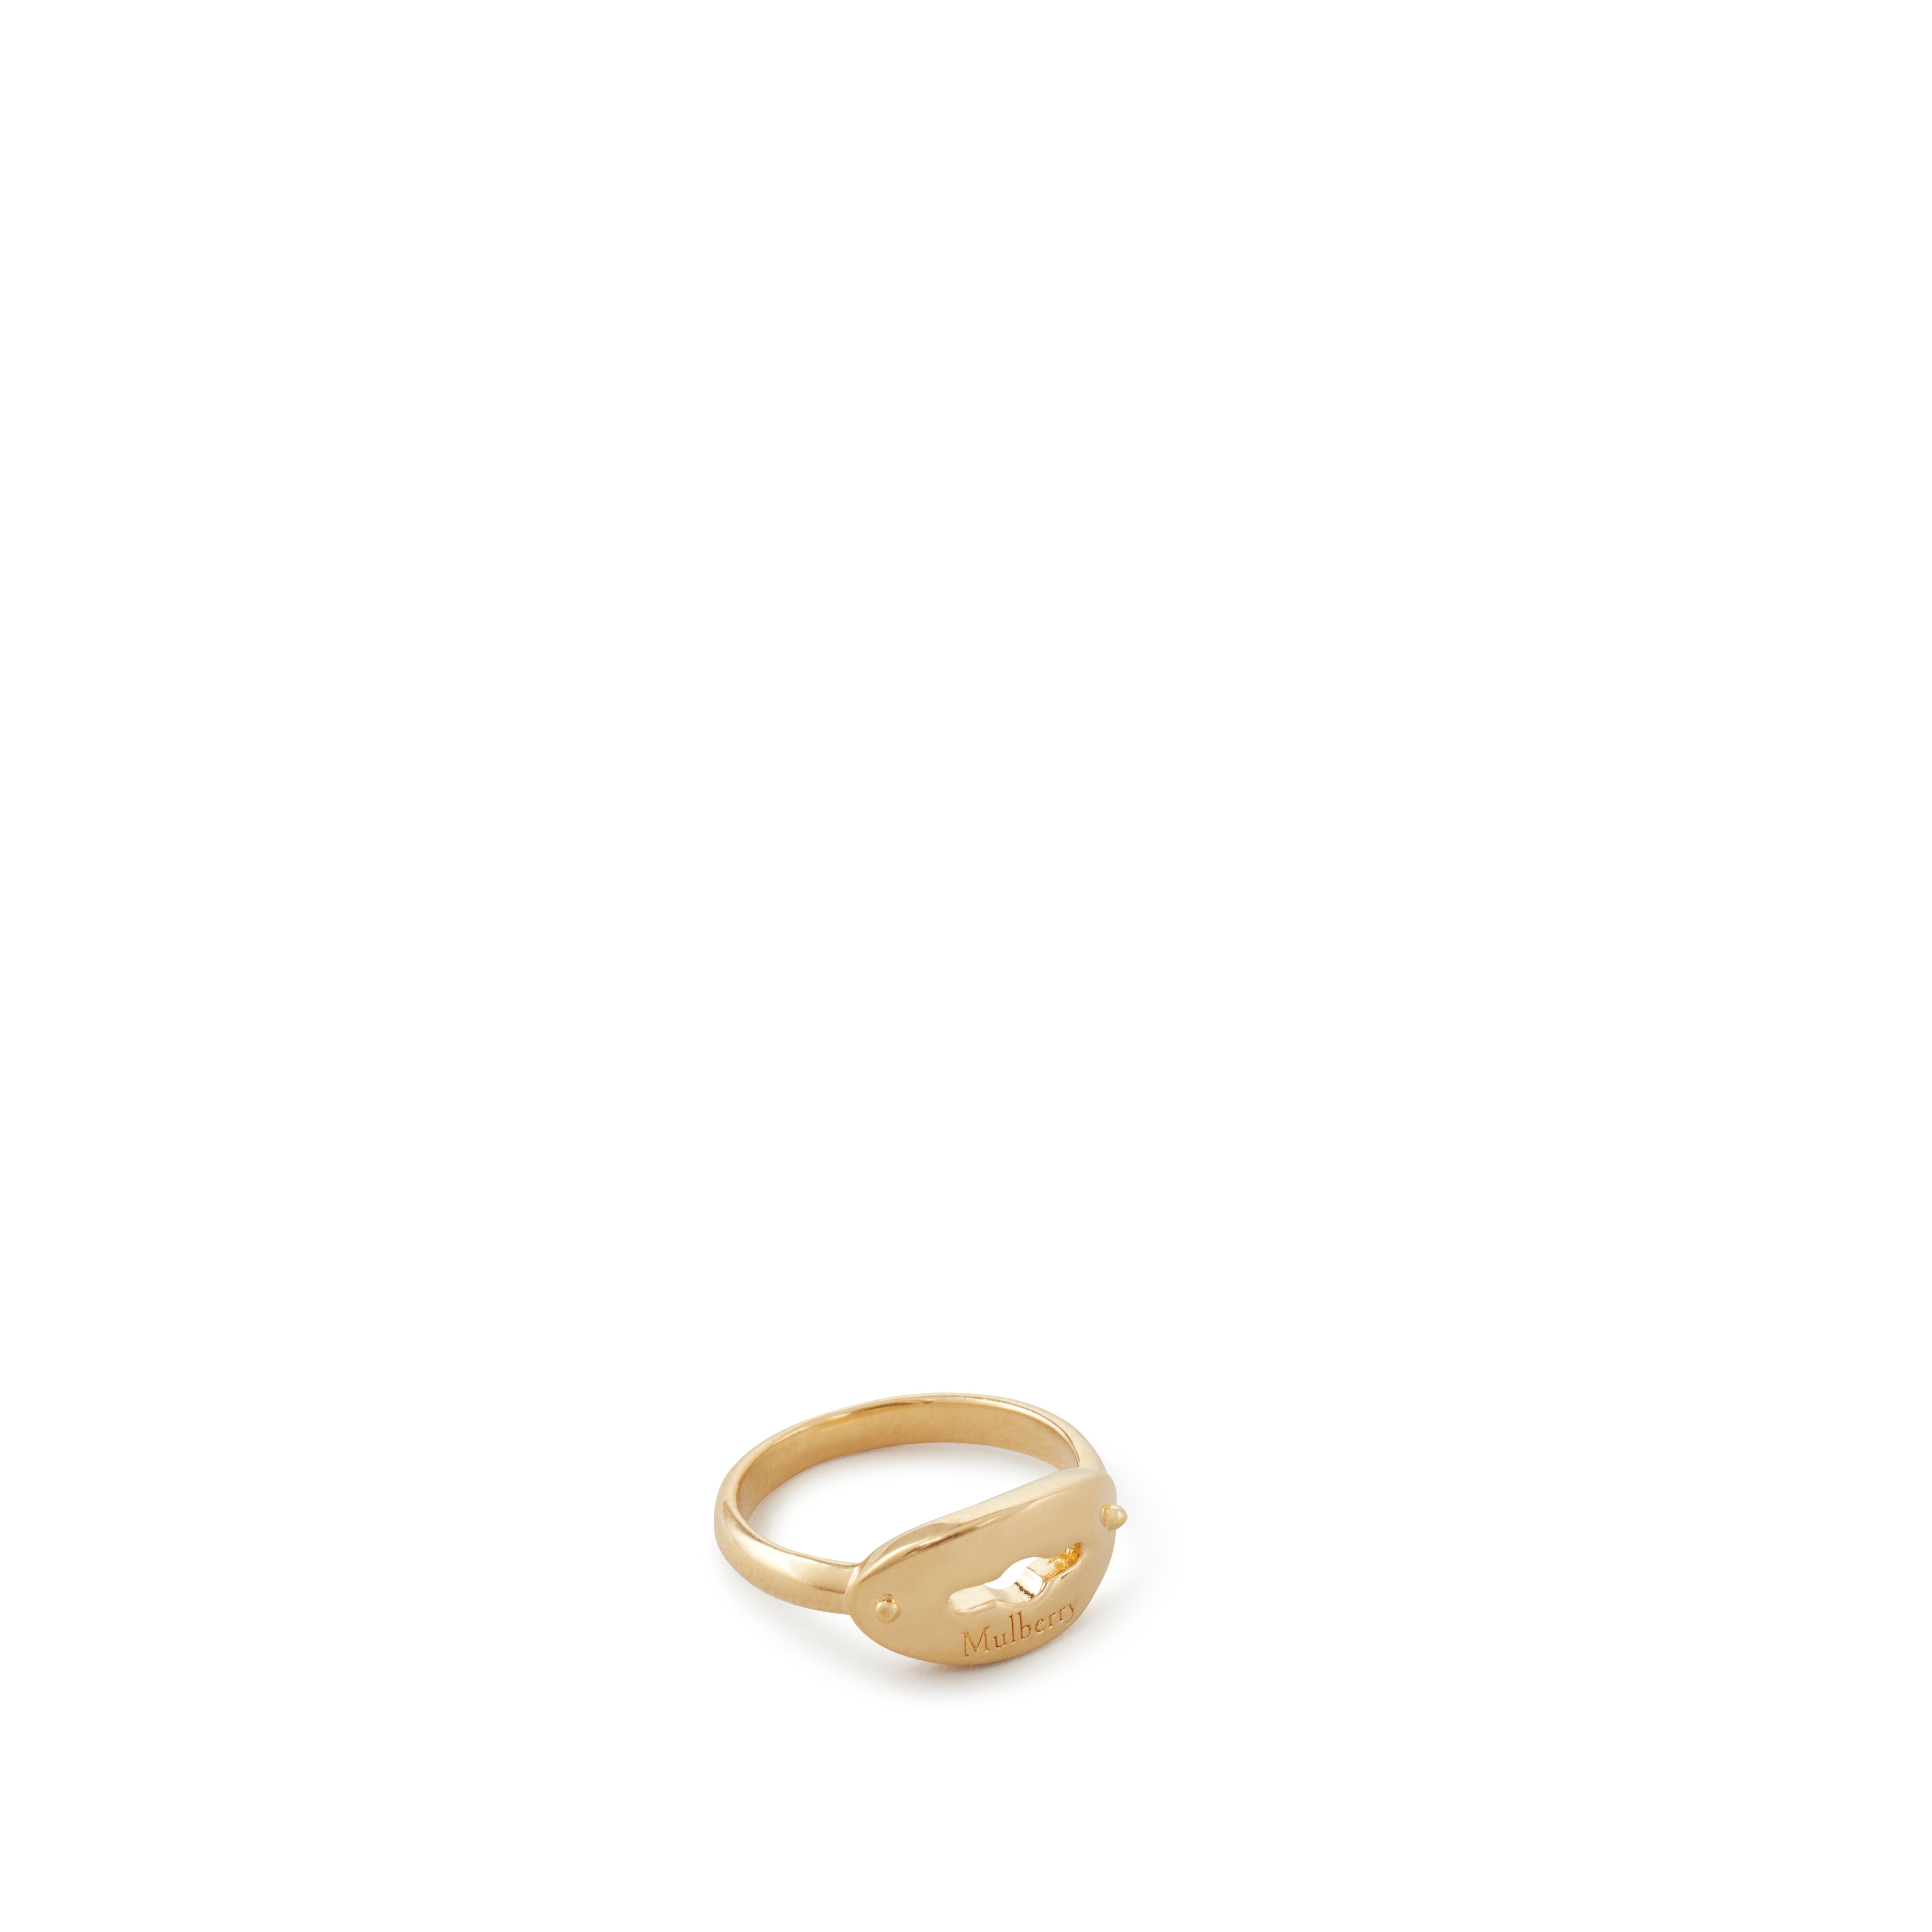 Mulberry Bayswater Small Ring In Gold